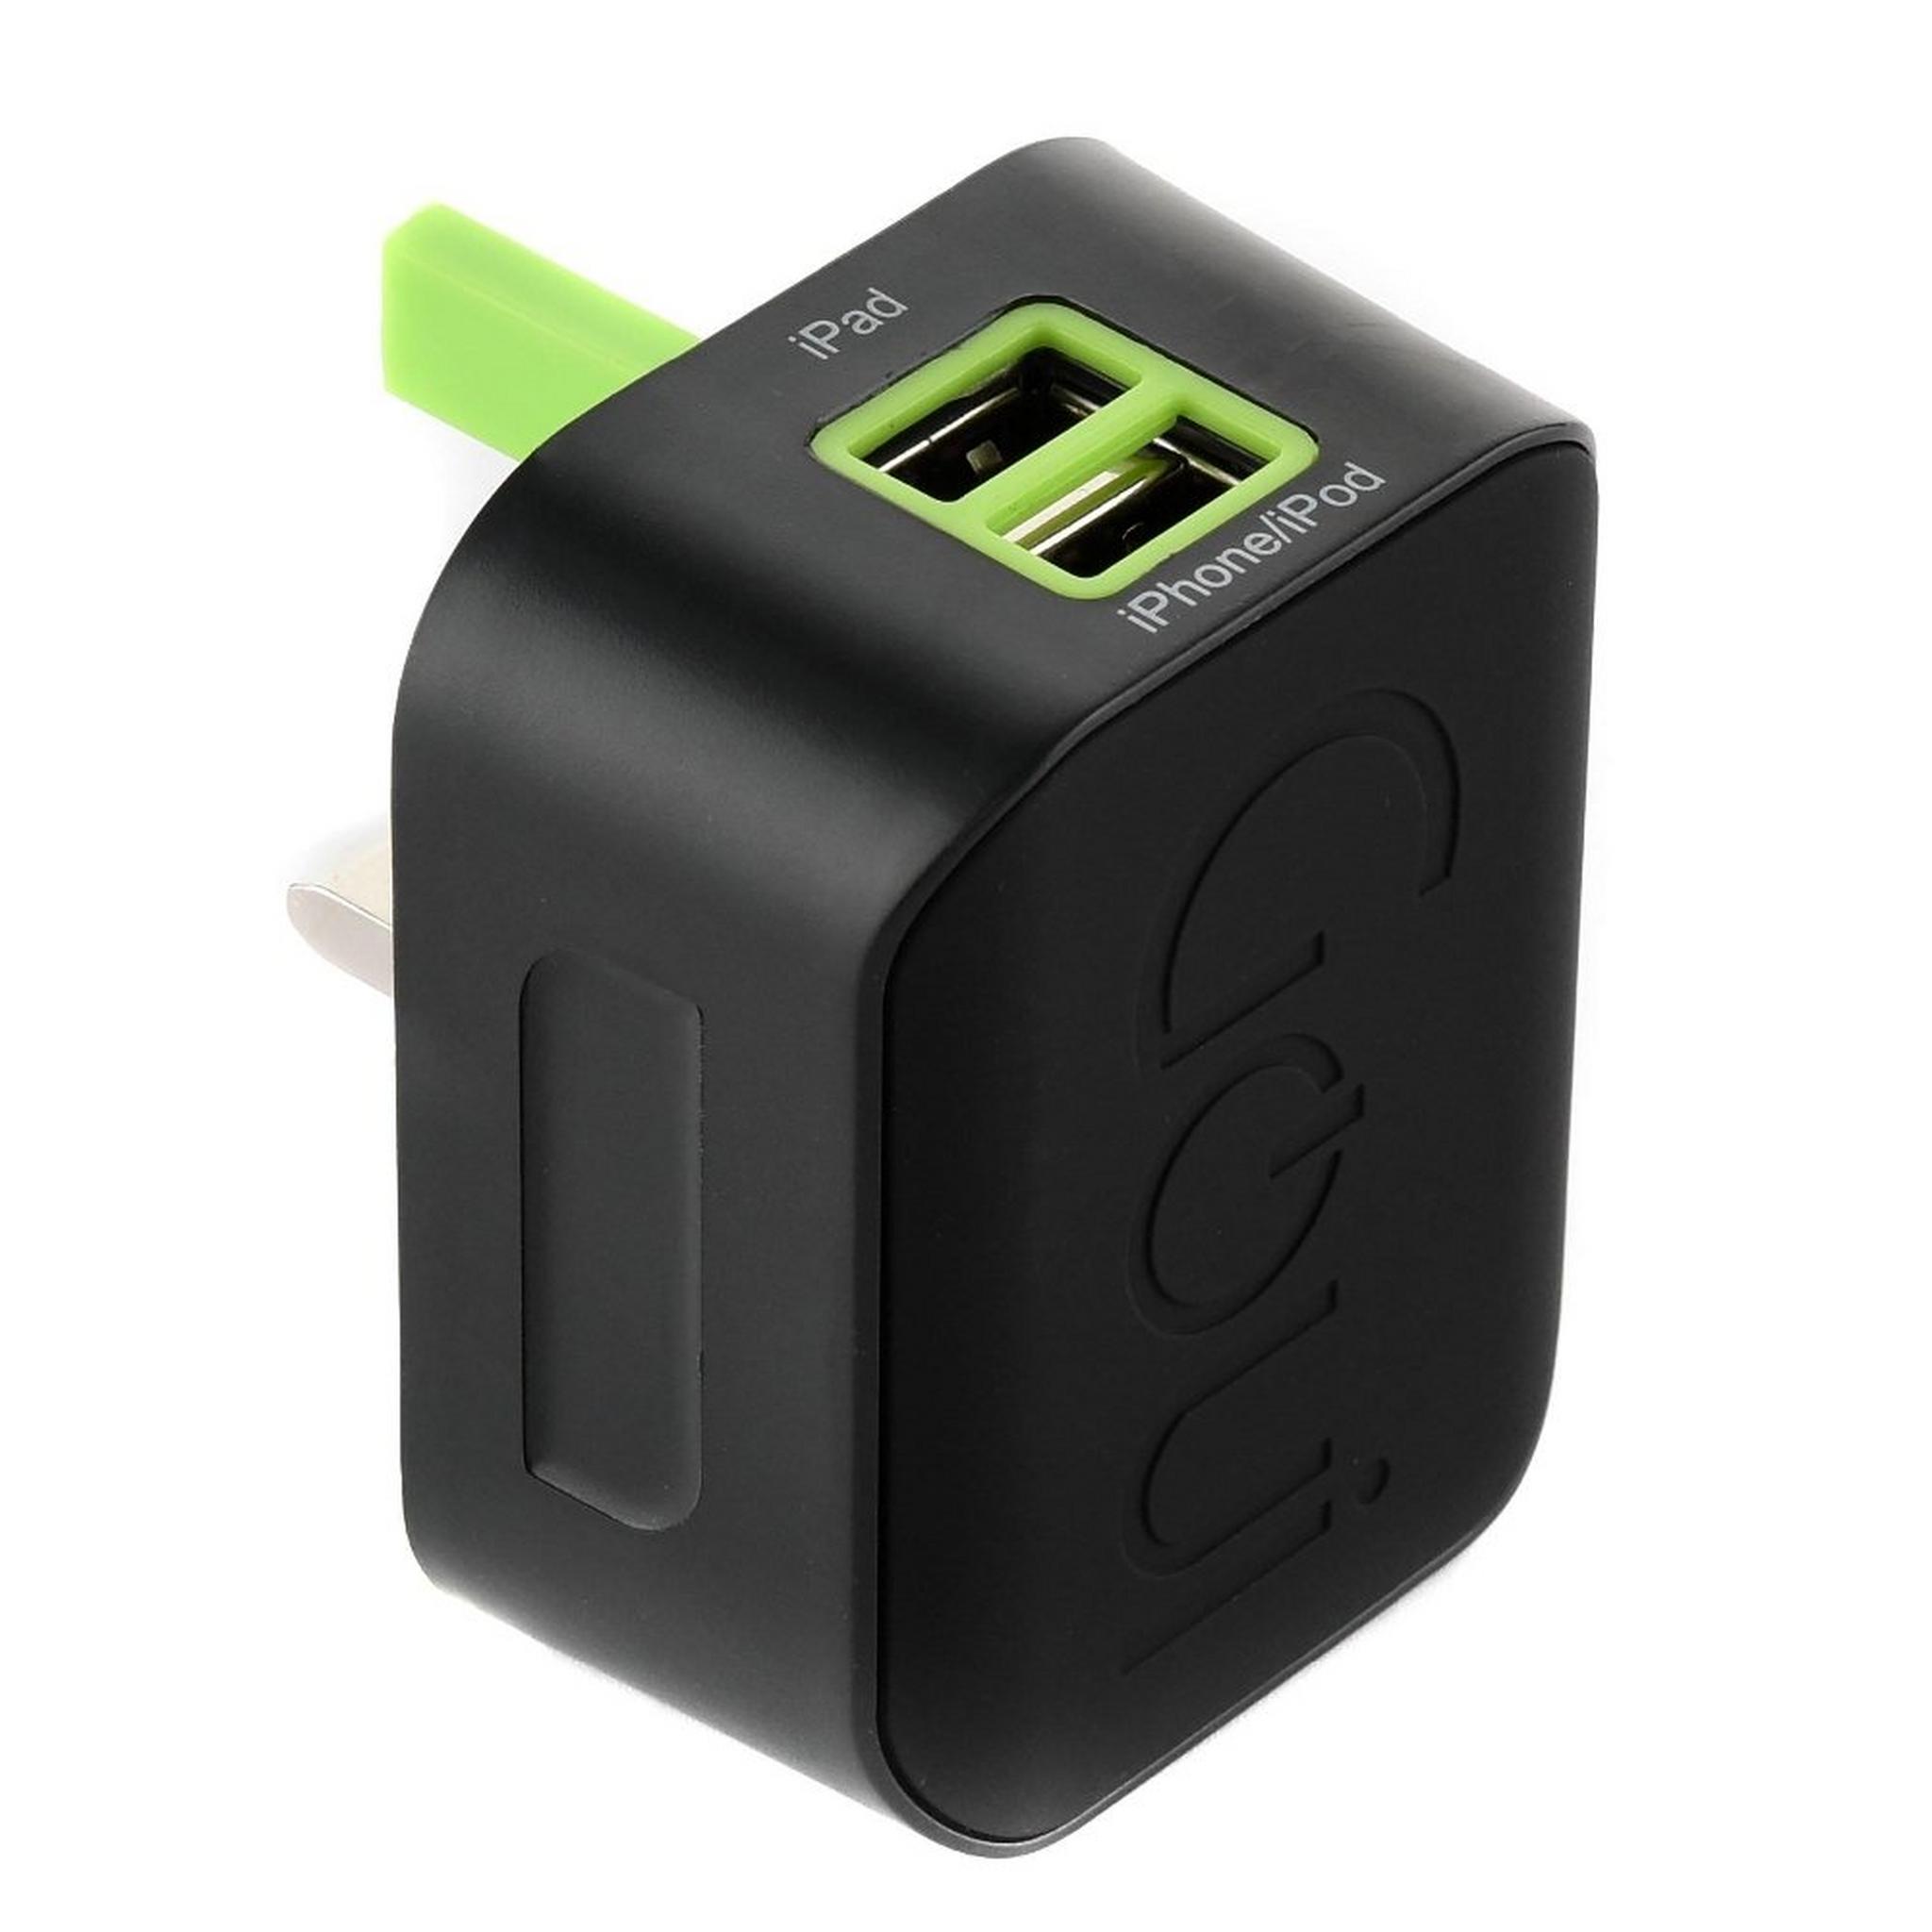 Goui Wall-i UK Wall Charger + Lightning Cable - Black